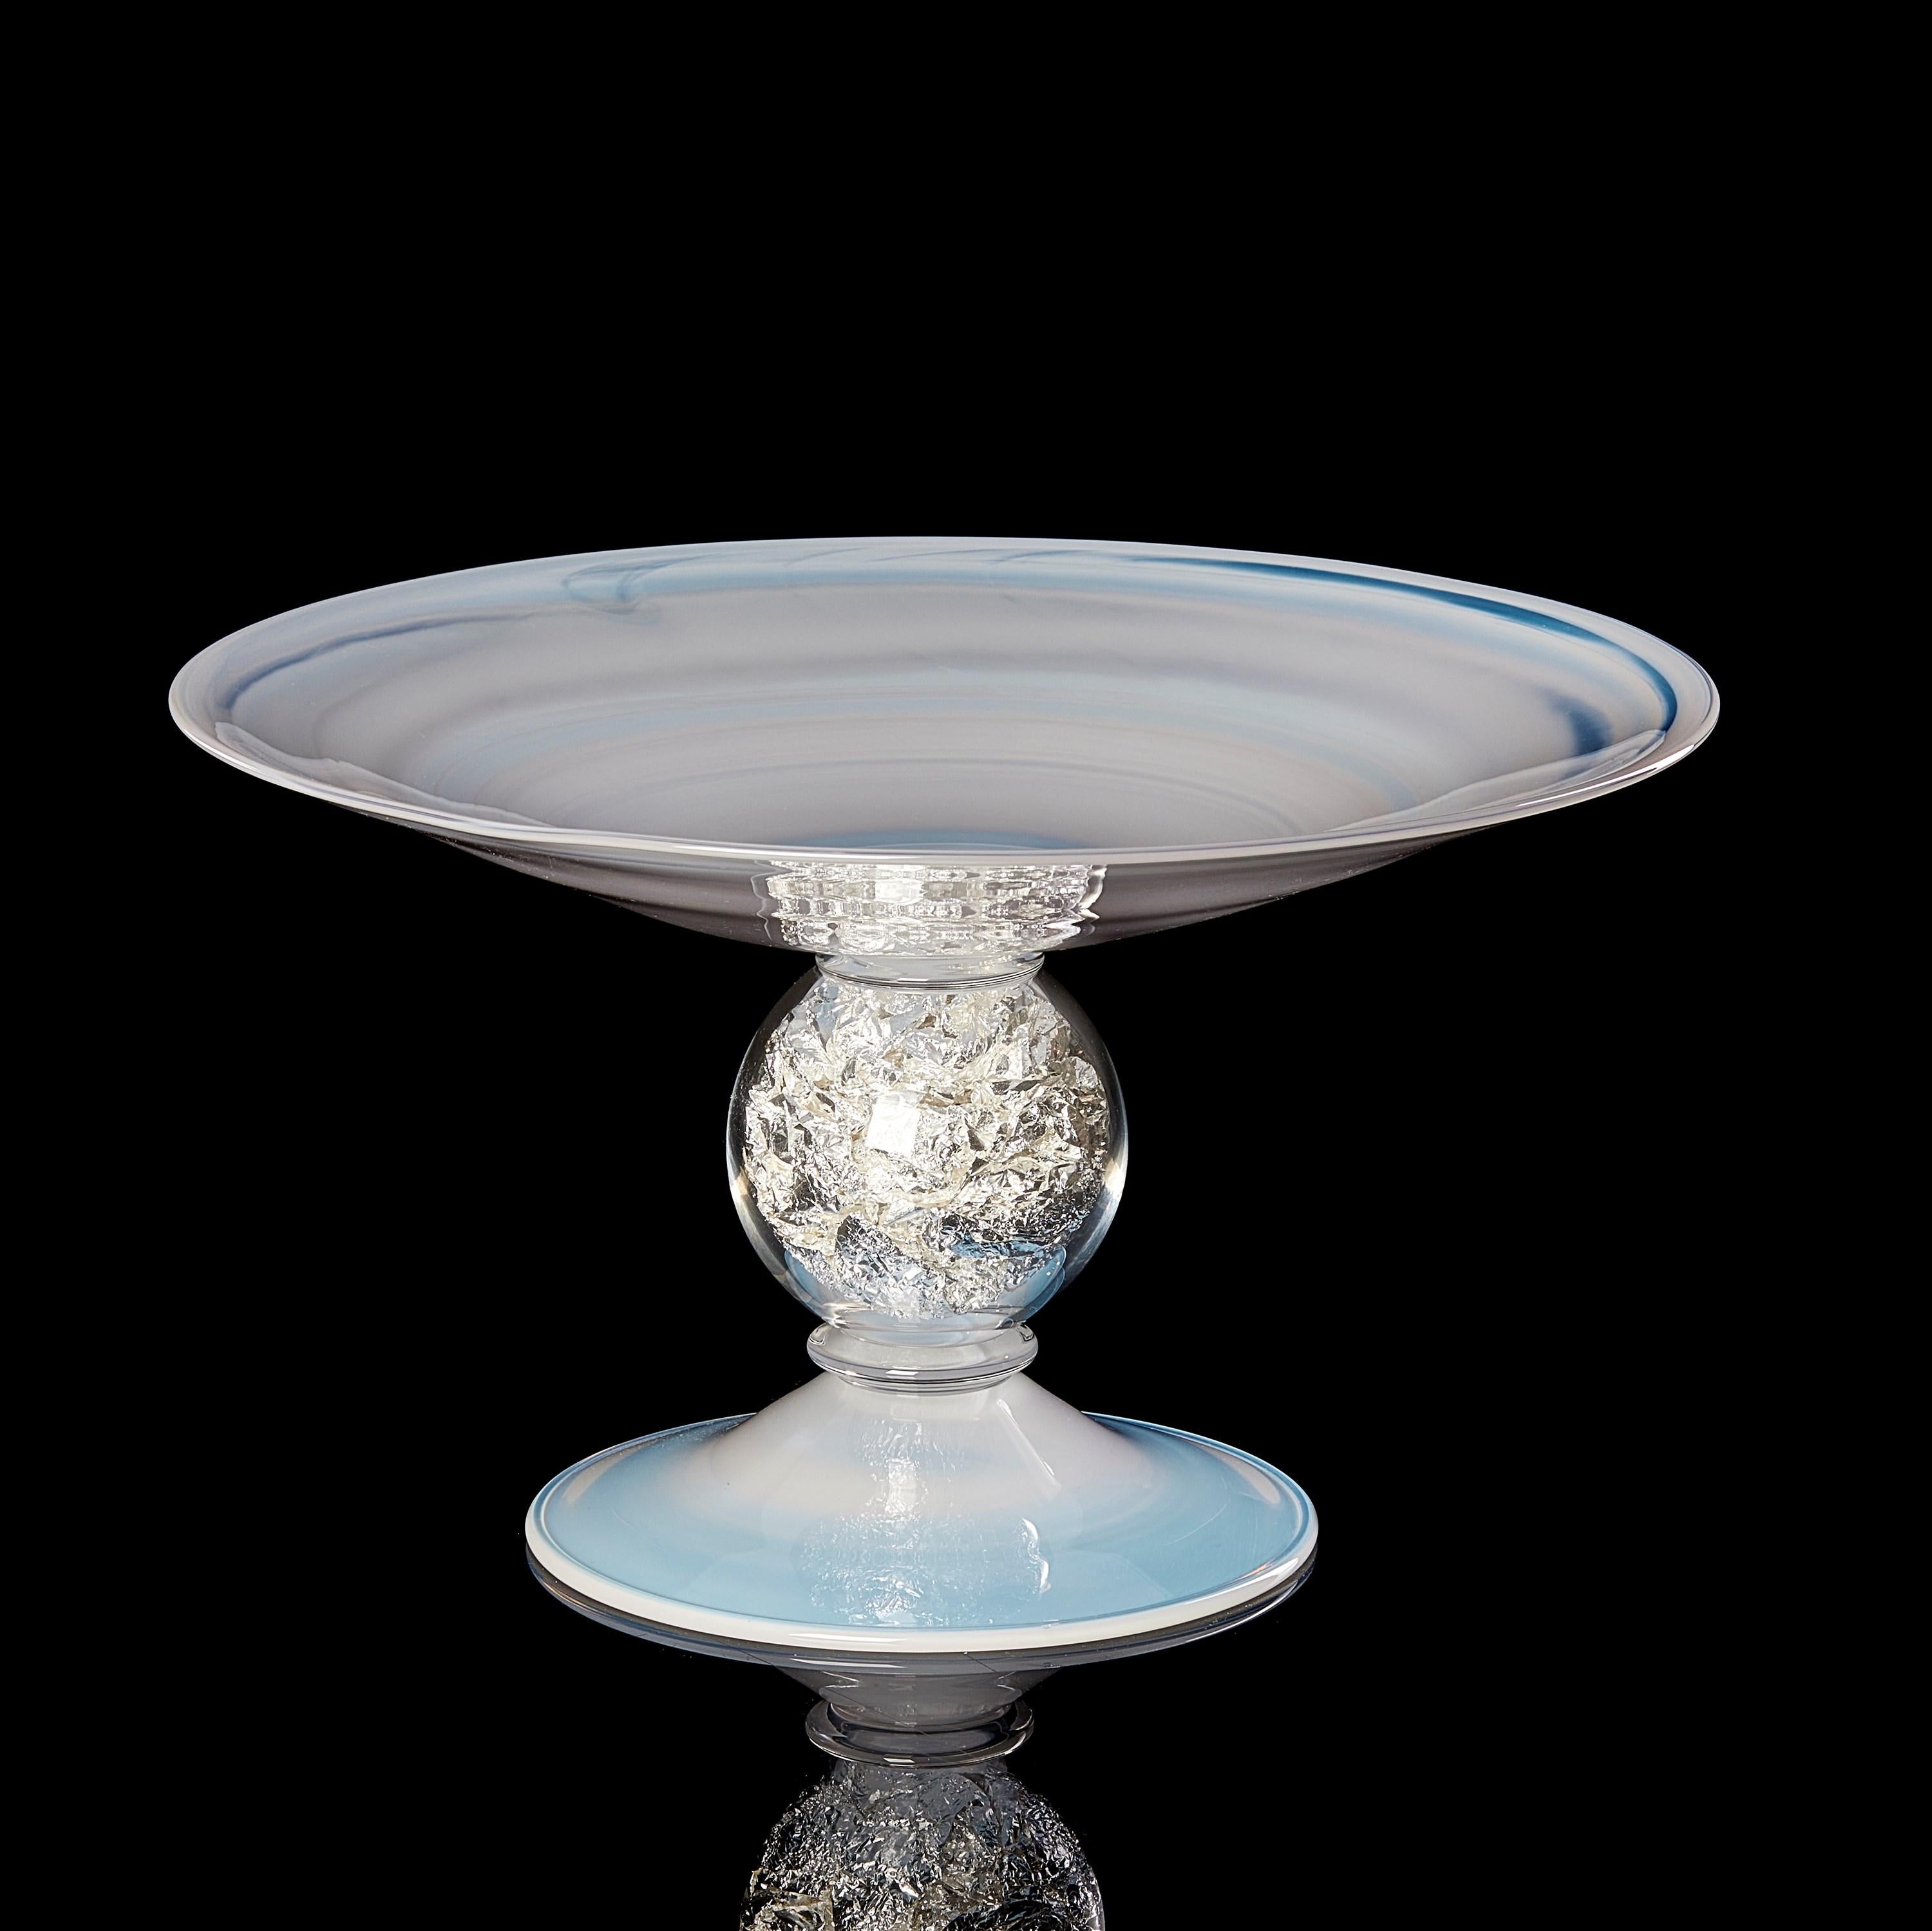 British Gambo d’Argento a milky white glass & silver leaf centrepiece by Anthony Scala For Sale